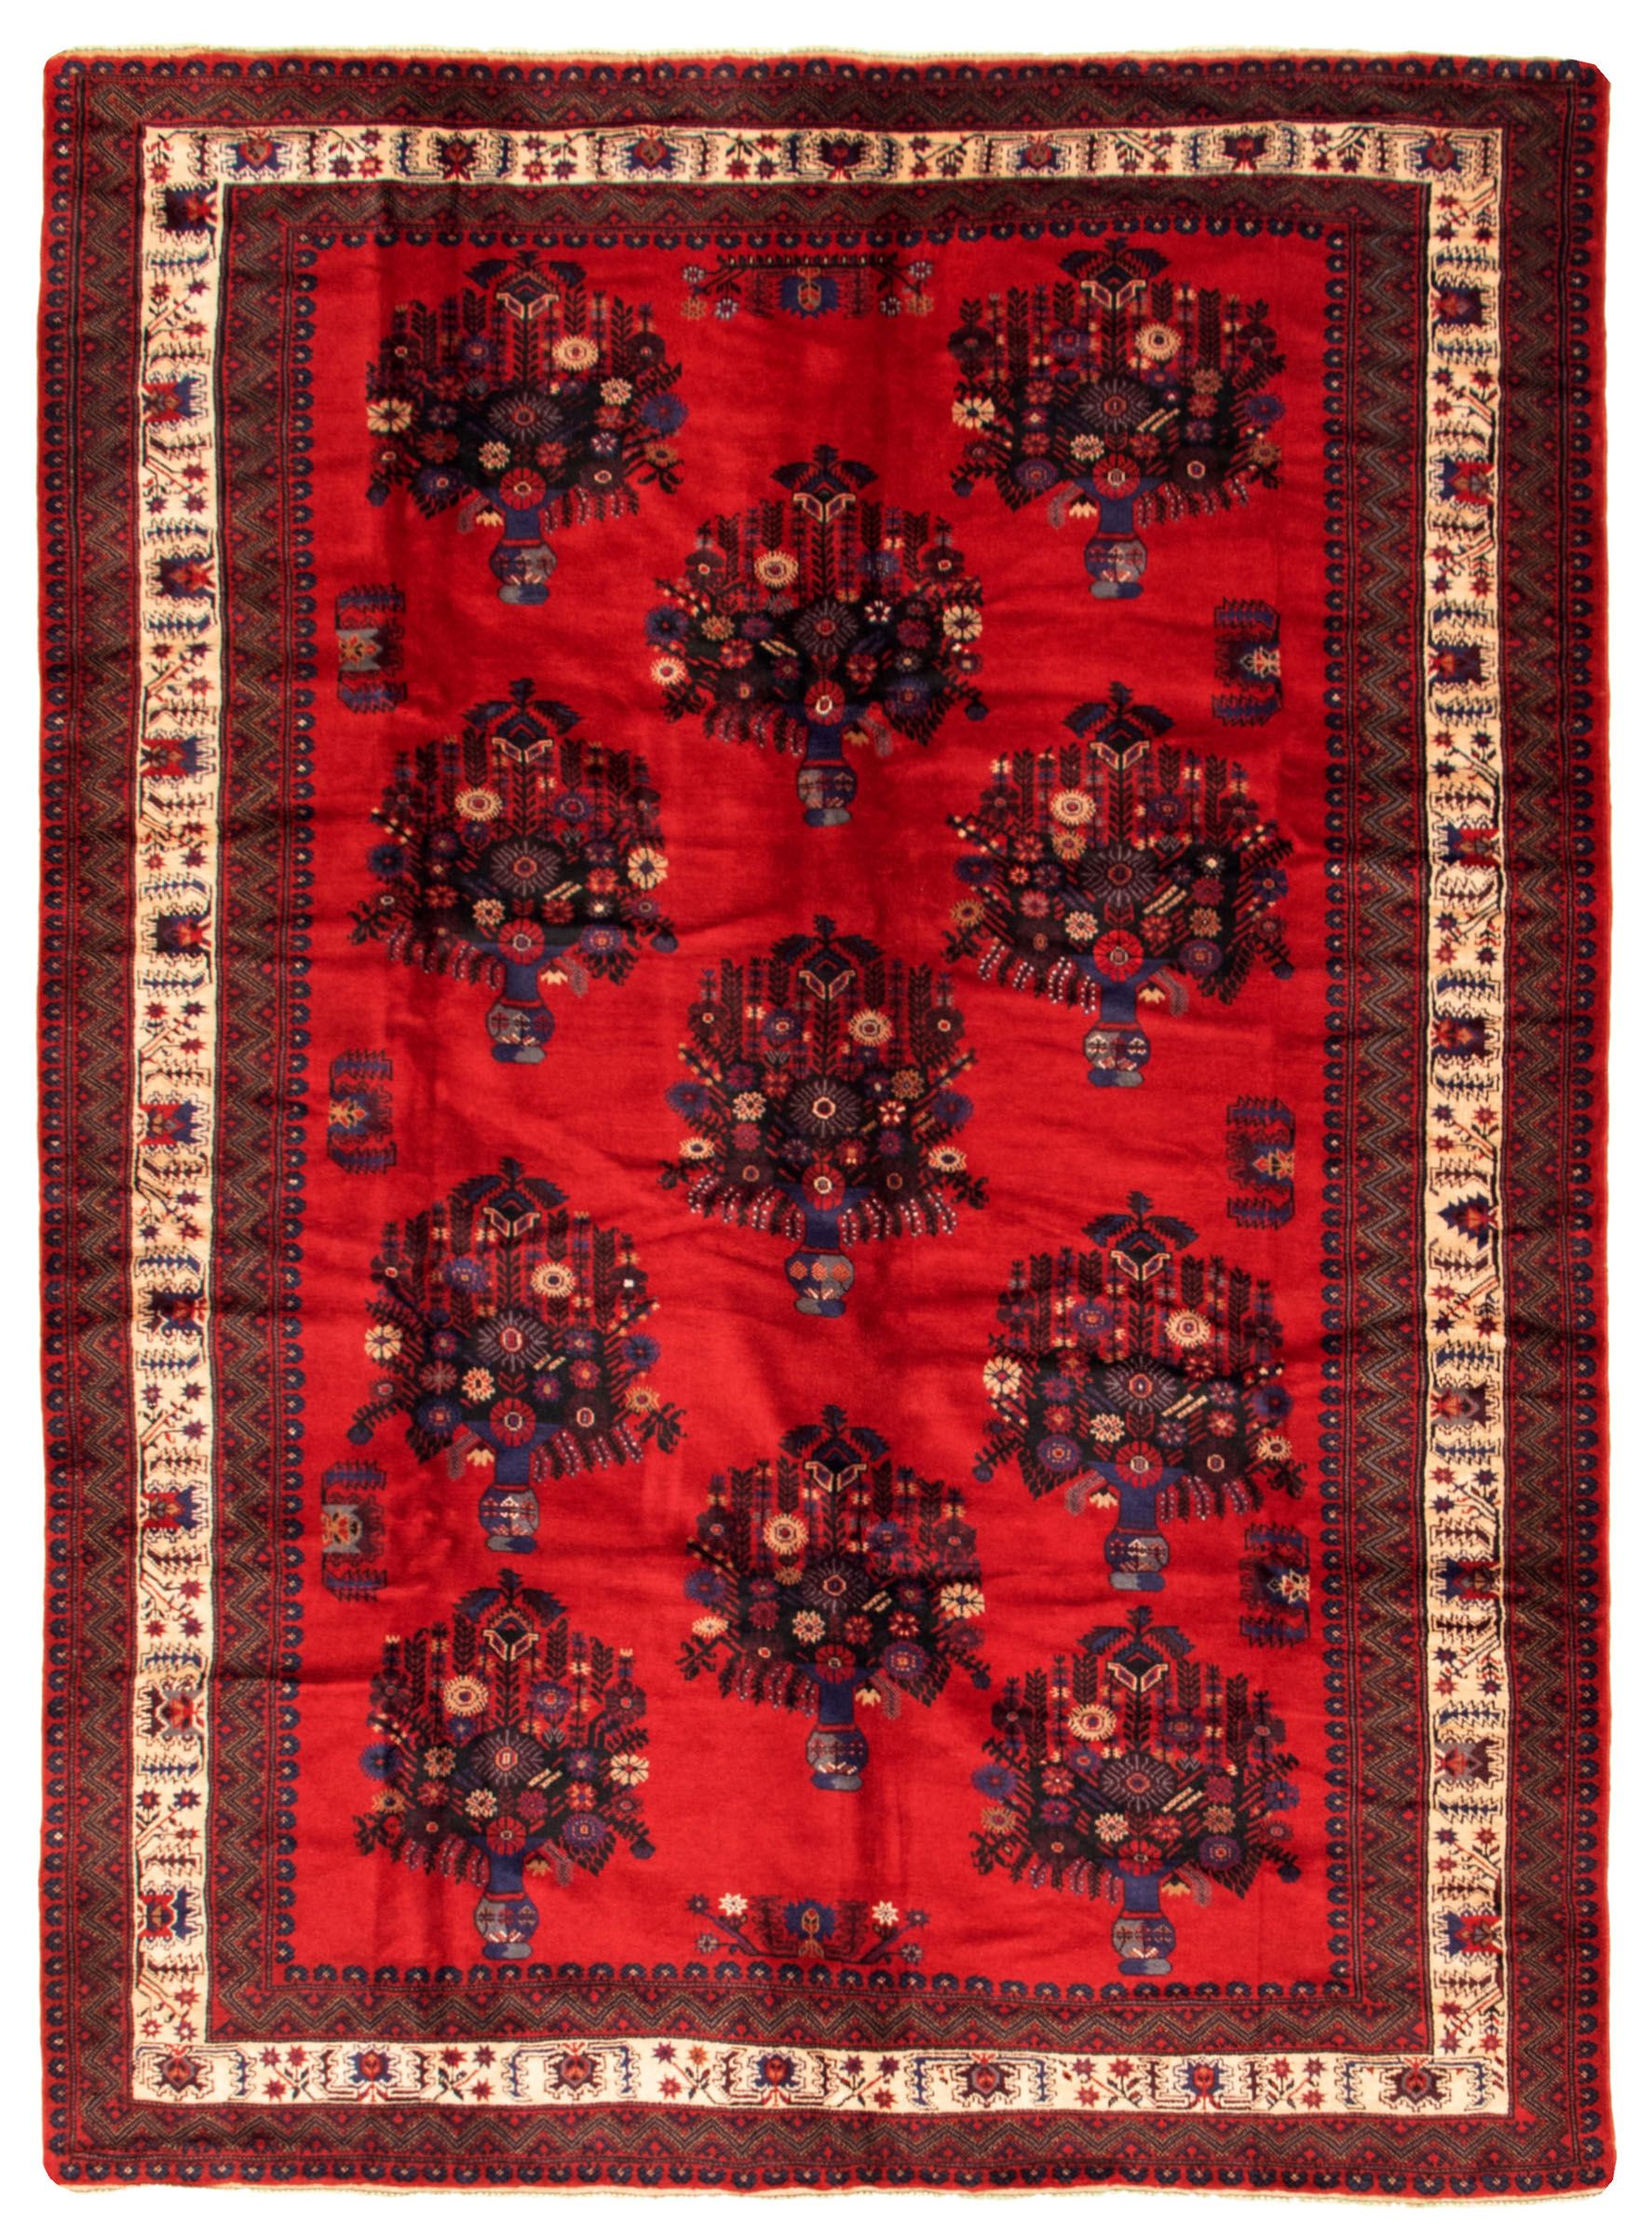 Hand Knotted Wool Red Rug Ecarpetgallery, 11 X 9 Area Rug